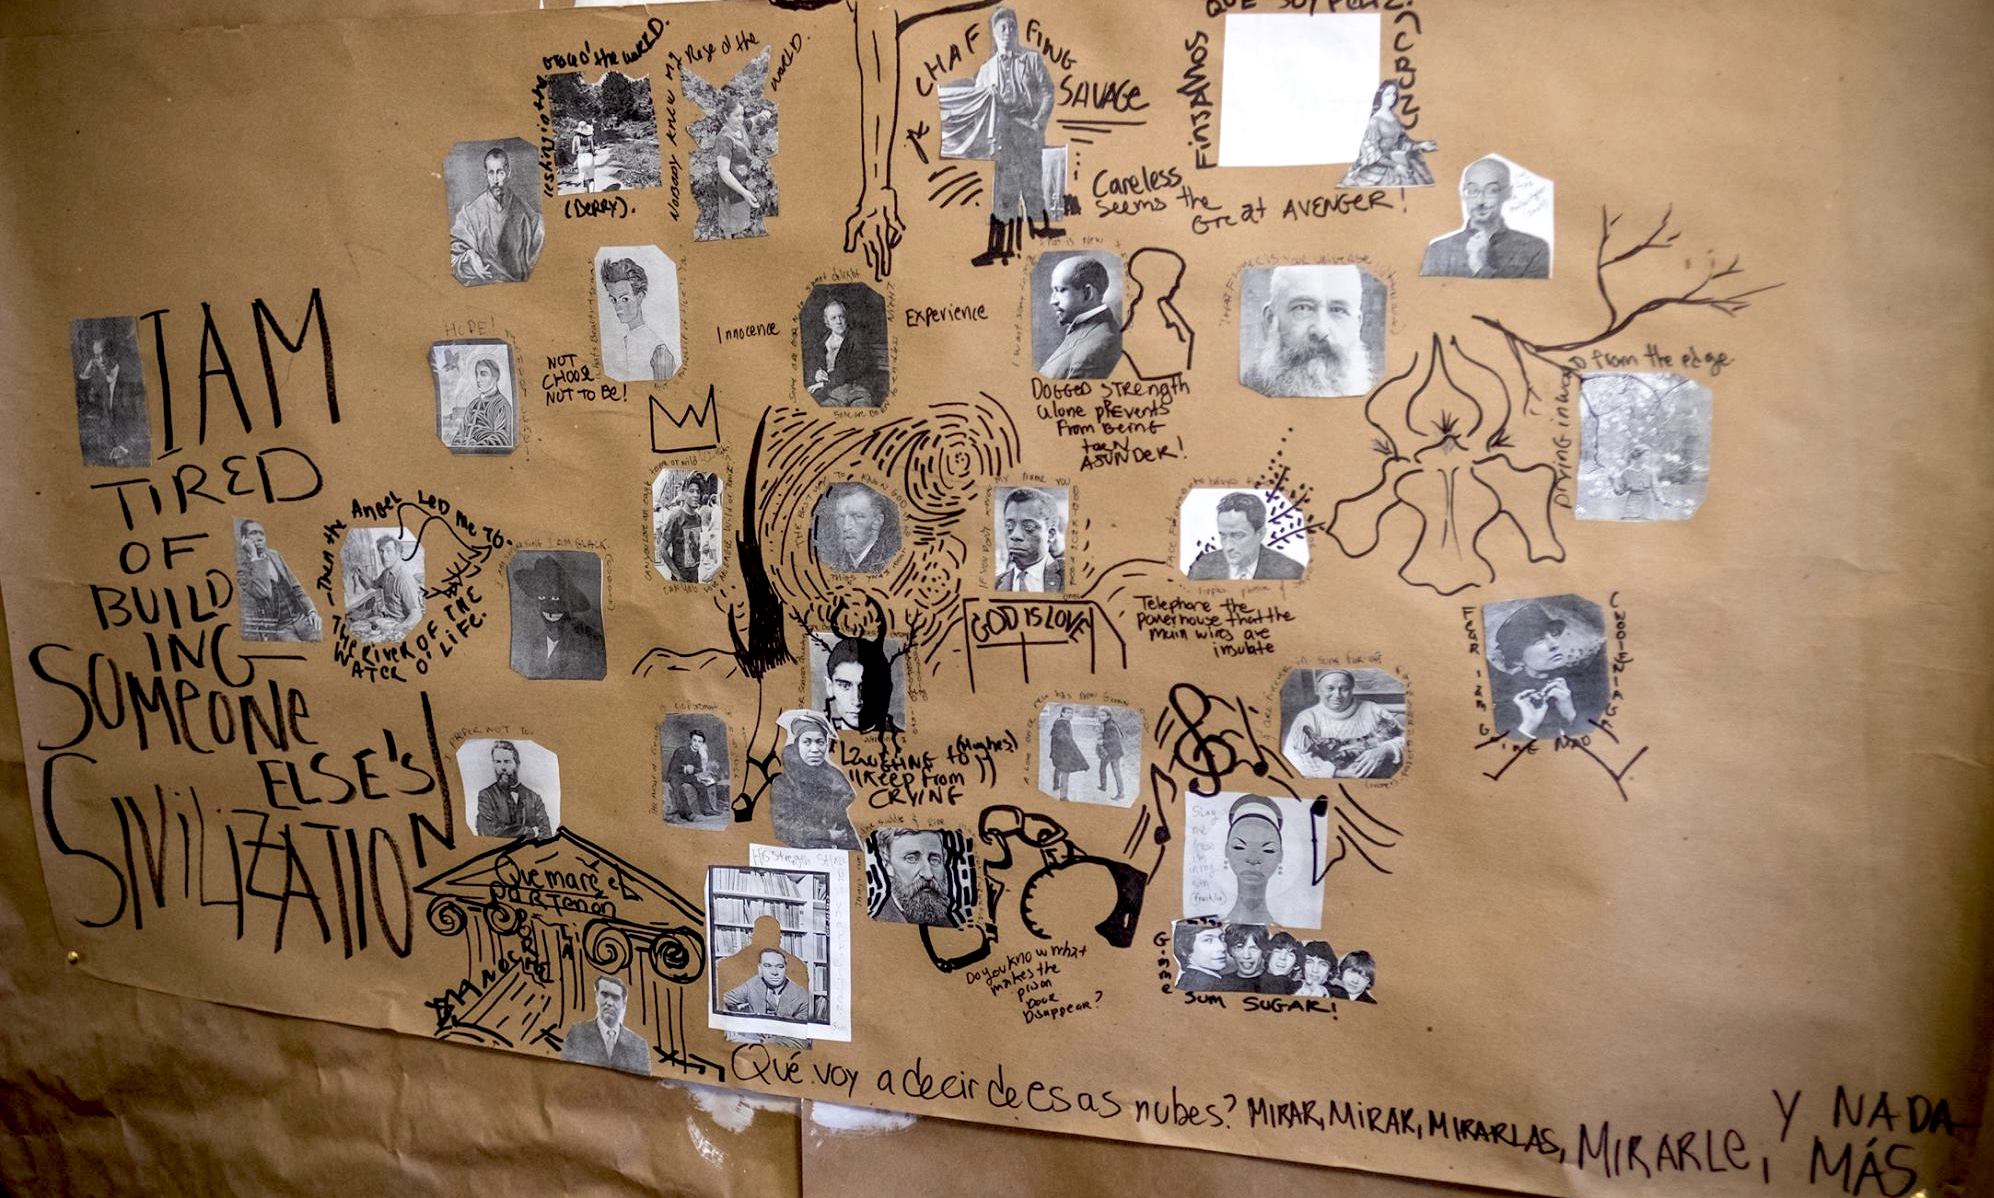 A mixed-media collage appears on a piece of what appears to be butcher paper. A cluster of printed-out black-and-white photographs of writers and artists appear surrounded by drawings and writing made in black permanent marker. The following figures appear surrounded by quotations: Fenton Johnson, followed in large text by “I am tired of building someone else’s civilization" and flanked by a photo of Paul Laurence Dunbar; Marc Chagall inside the quote “Then the angel led me to the river of the water o’ life” with angels’ wings drawn on his back; next to a self-portrait by painter Kerry James Marshall titled "The Invisible Man"; next to a photograph of Jean-Michel Basquiat with his signature crown drawn above his head next to a rendering of the tree from Van Gogh’s starry night next to a self-portrait of Vincent Van Gogh; above a photo of a young Franz Kafka with a beetle drawn over half his face; above a painting of Toulouse-Lautrec next to a drawing of a high-heeled leg between a photo of Herman Melville below the words “I prefer not to” and a photo of Zora Neale Hurston next to the words “Laugh to Keep from Crying” (Hughes); above a photo of Henry David Thoreau with an unshackled handcuff coming from his drawing next to the words “Do you know what makes the prison door disappear?”; adjacent to an image of Richard Wright cut out of a picture of a library and pasted back on it, leaving a brown silhouette behind him; next to a drawing of Federico García Lorca inside a drawing of the Parthenon with the words “Quemaré el Partenón para por la noche”; next to the words “Qué voy a decir de esas nubes? Mirar, mirar, mirarlas, mirarle, y nada más.” Above these words, the Rolling Stones appear next to the words “Gimme sum Sugar!” below a drawing of Nina Simone with musical notes drawn around her. Above her are two photos, one of Simon & Garfunkel, the other of Romare Bearden; next to Bearden is a photo of Georgia O’Keefe beneath a drawing of one of her flowers next to a photo of Edna St. Vincent Millay below a drawing of tree branches beneath photos of Junot Diaz and Claude Monet. Above them is a painting of Sor Juana and a space held by Blanka Amezkua; next to a photo of Claude McKay surrounded by the words: “Chaffing savage; careless seems the great avenger” above a photo of W.E.B. DuBois next to a drawing of his silhouette facing the opposite direction above the words “Dogged strength alone prevents from being torn asunder!” above a photo of James Baldwin surrounded by the words “If you don’t know my name you don’t know your own.” Below a drawing of a pulpit reads “God Is Love”; next to a photo of Jean Toomer above the words “telephone the powerhouse that the main wires are insulate” on one side and a painting of William Blake on the other between the two words “Innocence” and “Experience” below a drawing of a long outstretched hand and next to a self-portrait of Egon Schiele next to the Words “Not Choose Not to Be!” and a painting of Gerard Manley Hopkins below a painting of El Greco, a photo of Claudia Muñoz and a photo of Natalia Méndez surrounded by the words: “Nobody knew my rose of the world.”